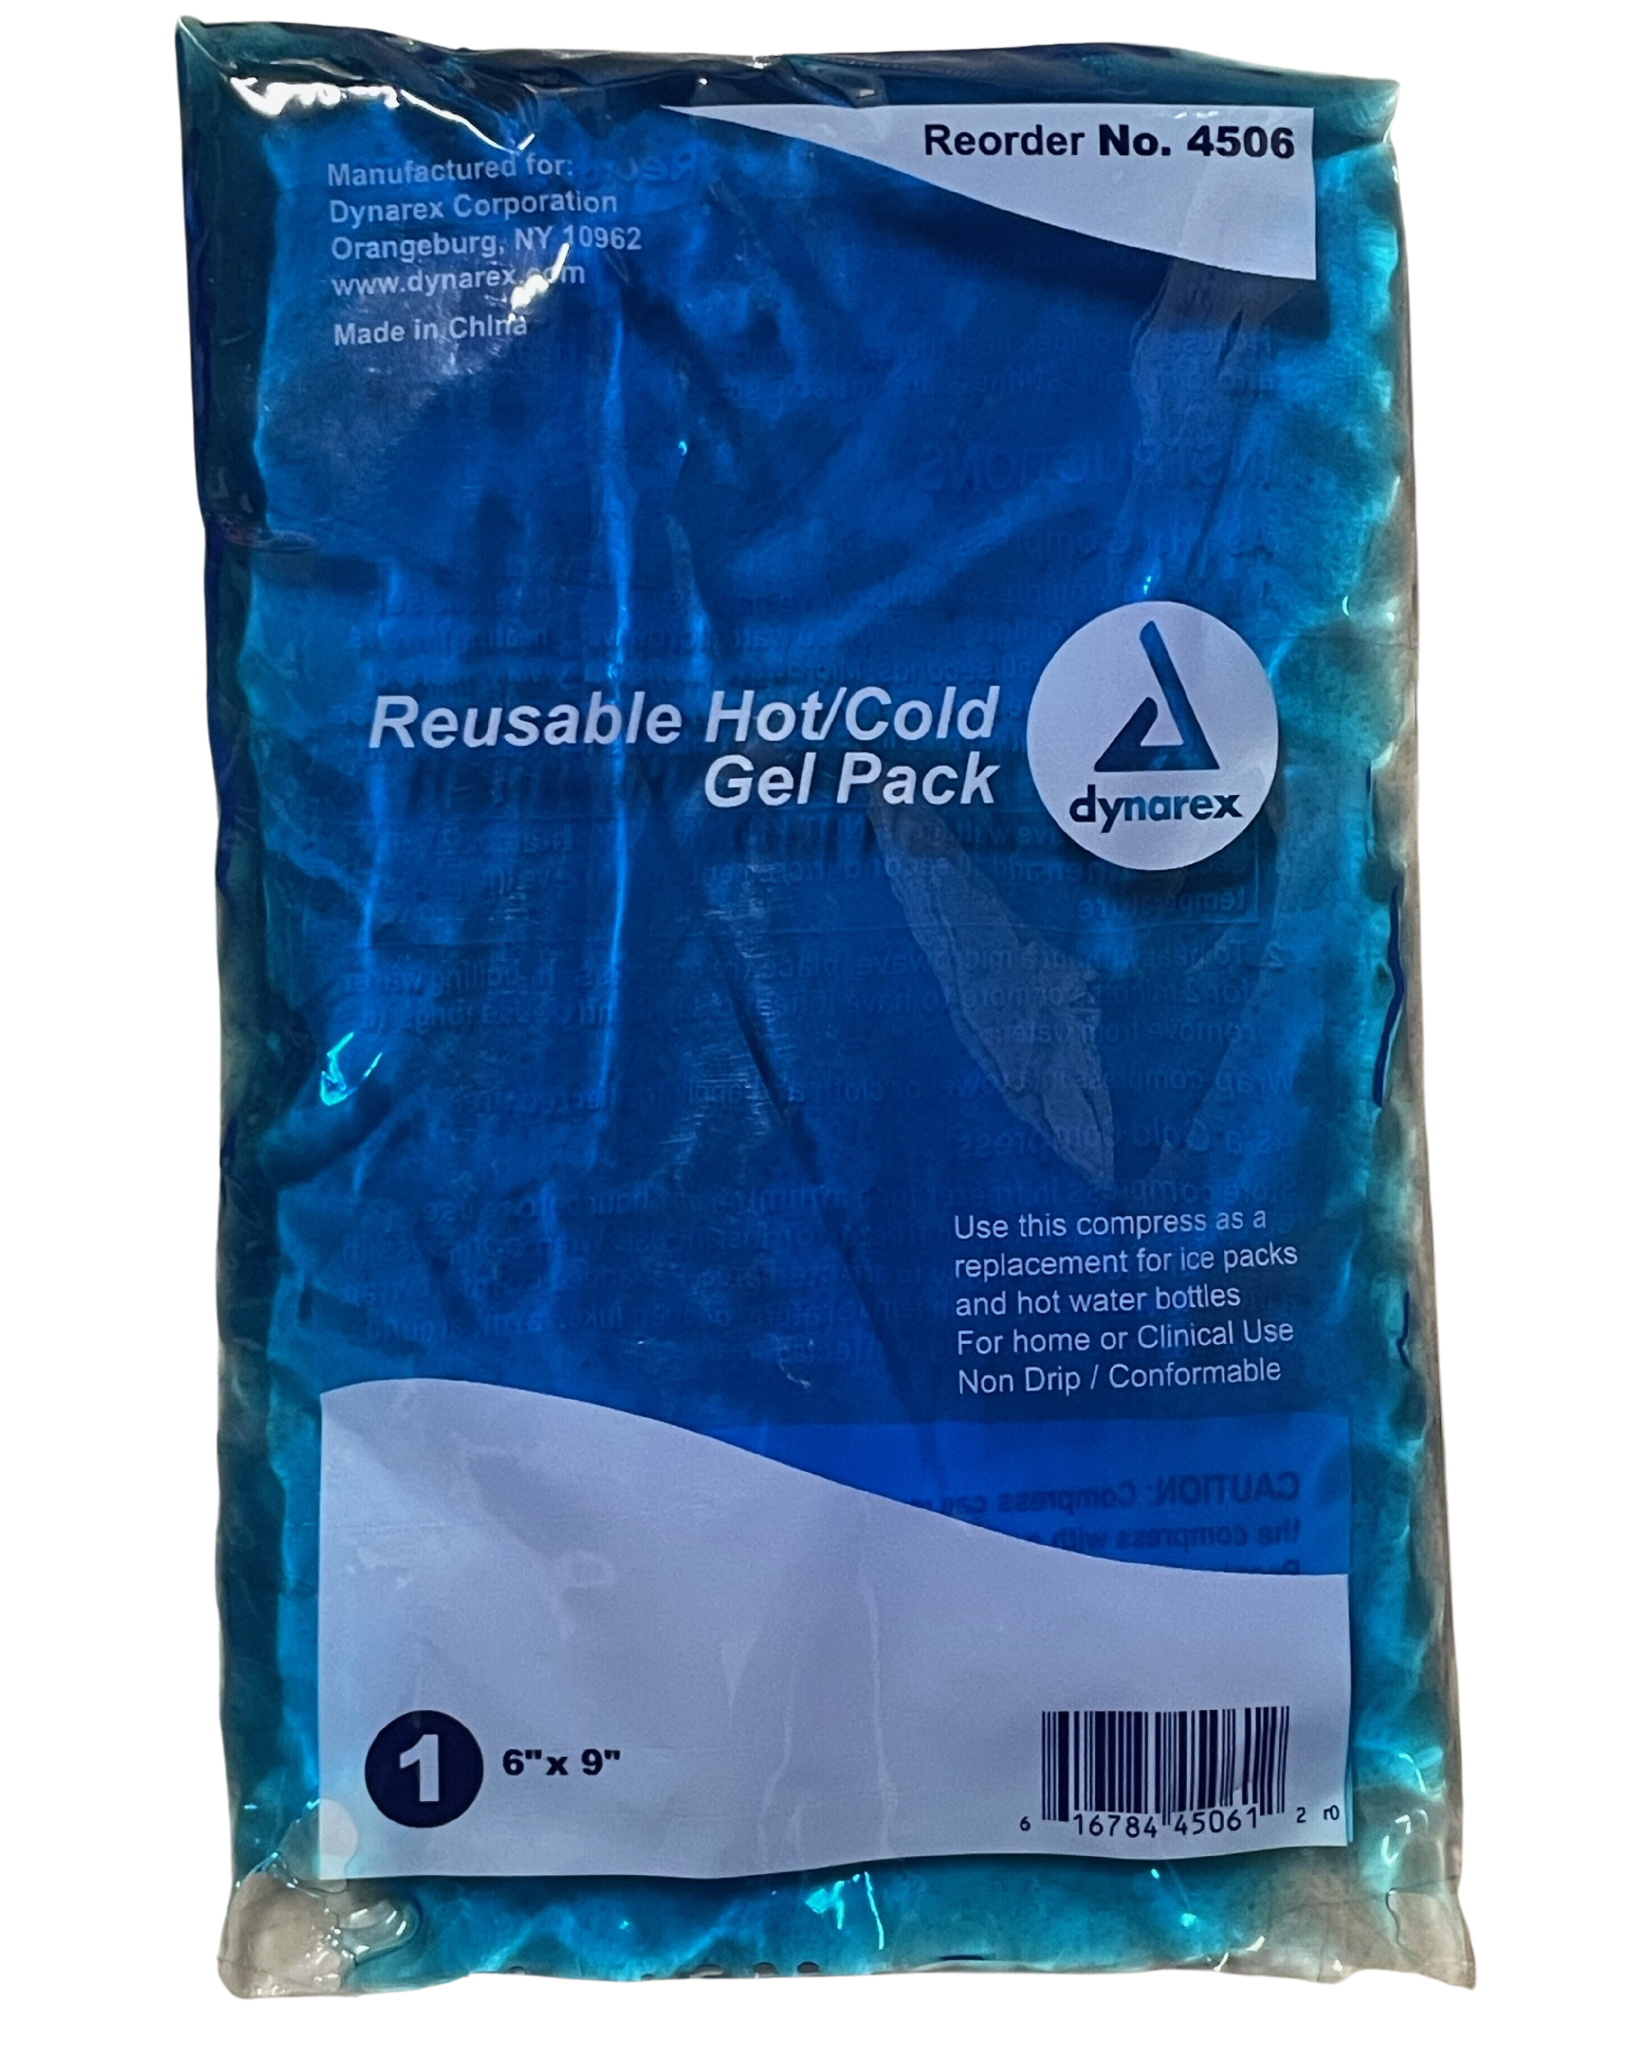 Reusable Hot/Cold Gel Pack, 6''x9''